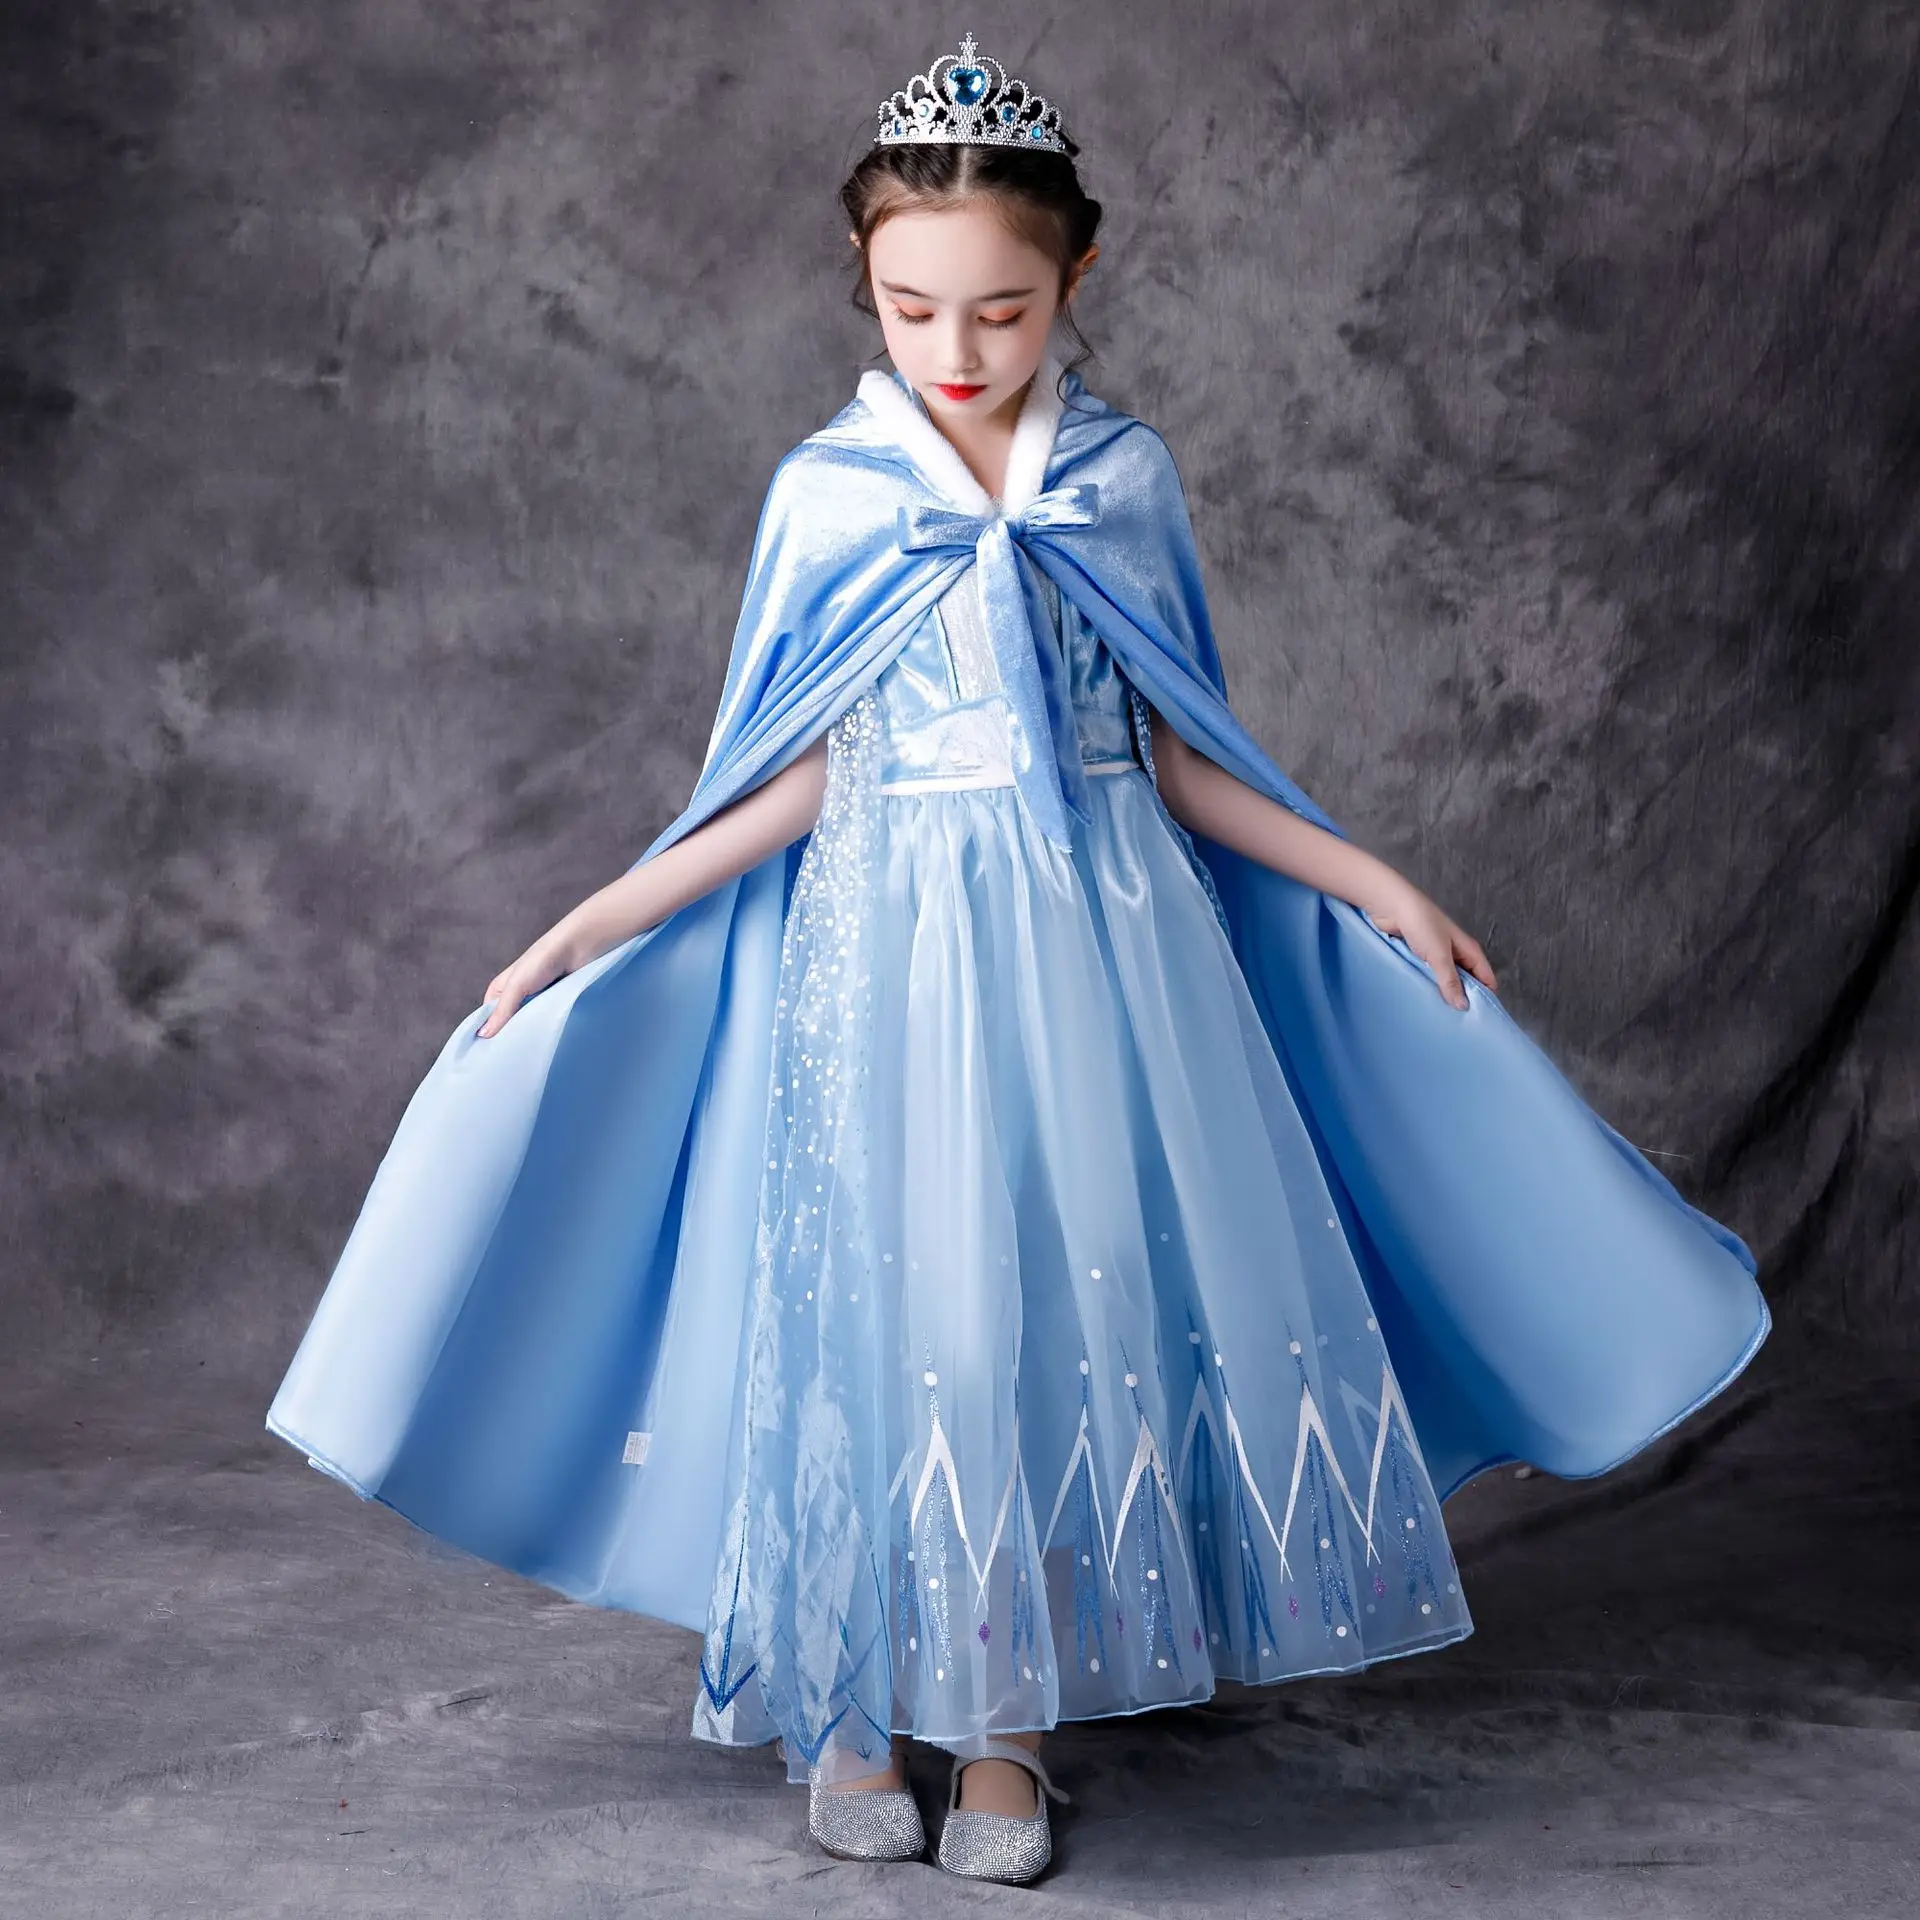 Toddler Kids Girls Anna Elsa Princess Dress Cosplay Party Fancy Costume Outfits 